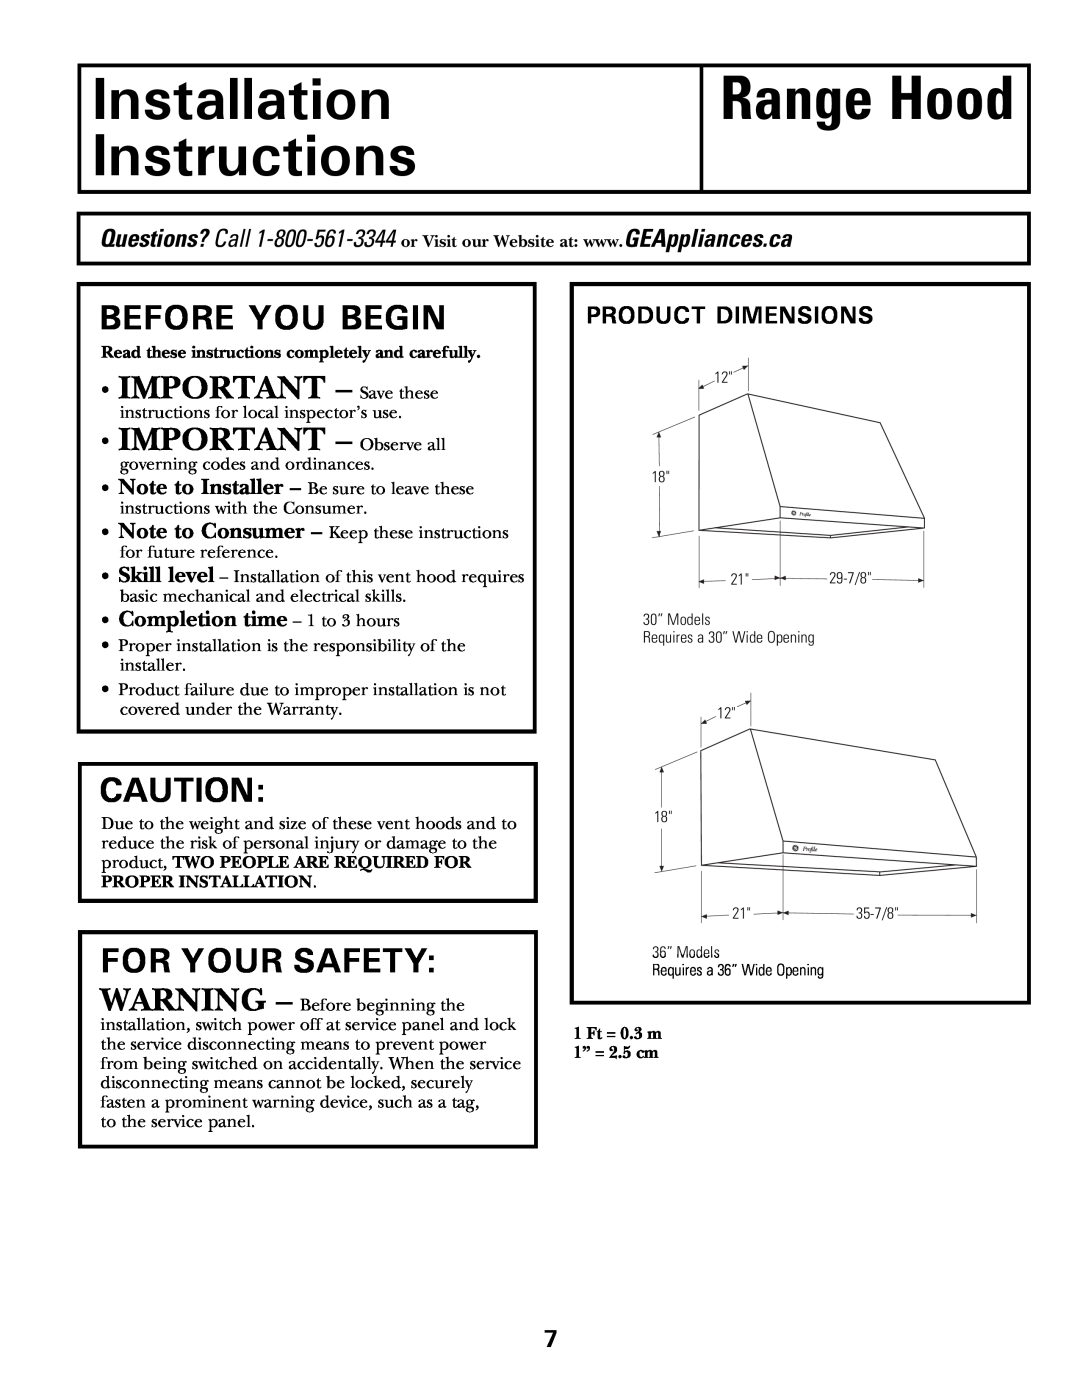 GE CV936 manual Before You Begin, For Your Safety, Product Dimensions, Range Hood, Installation Instructions 